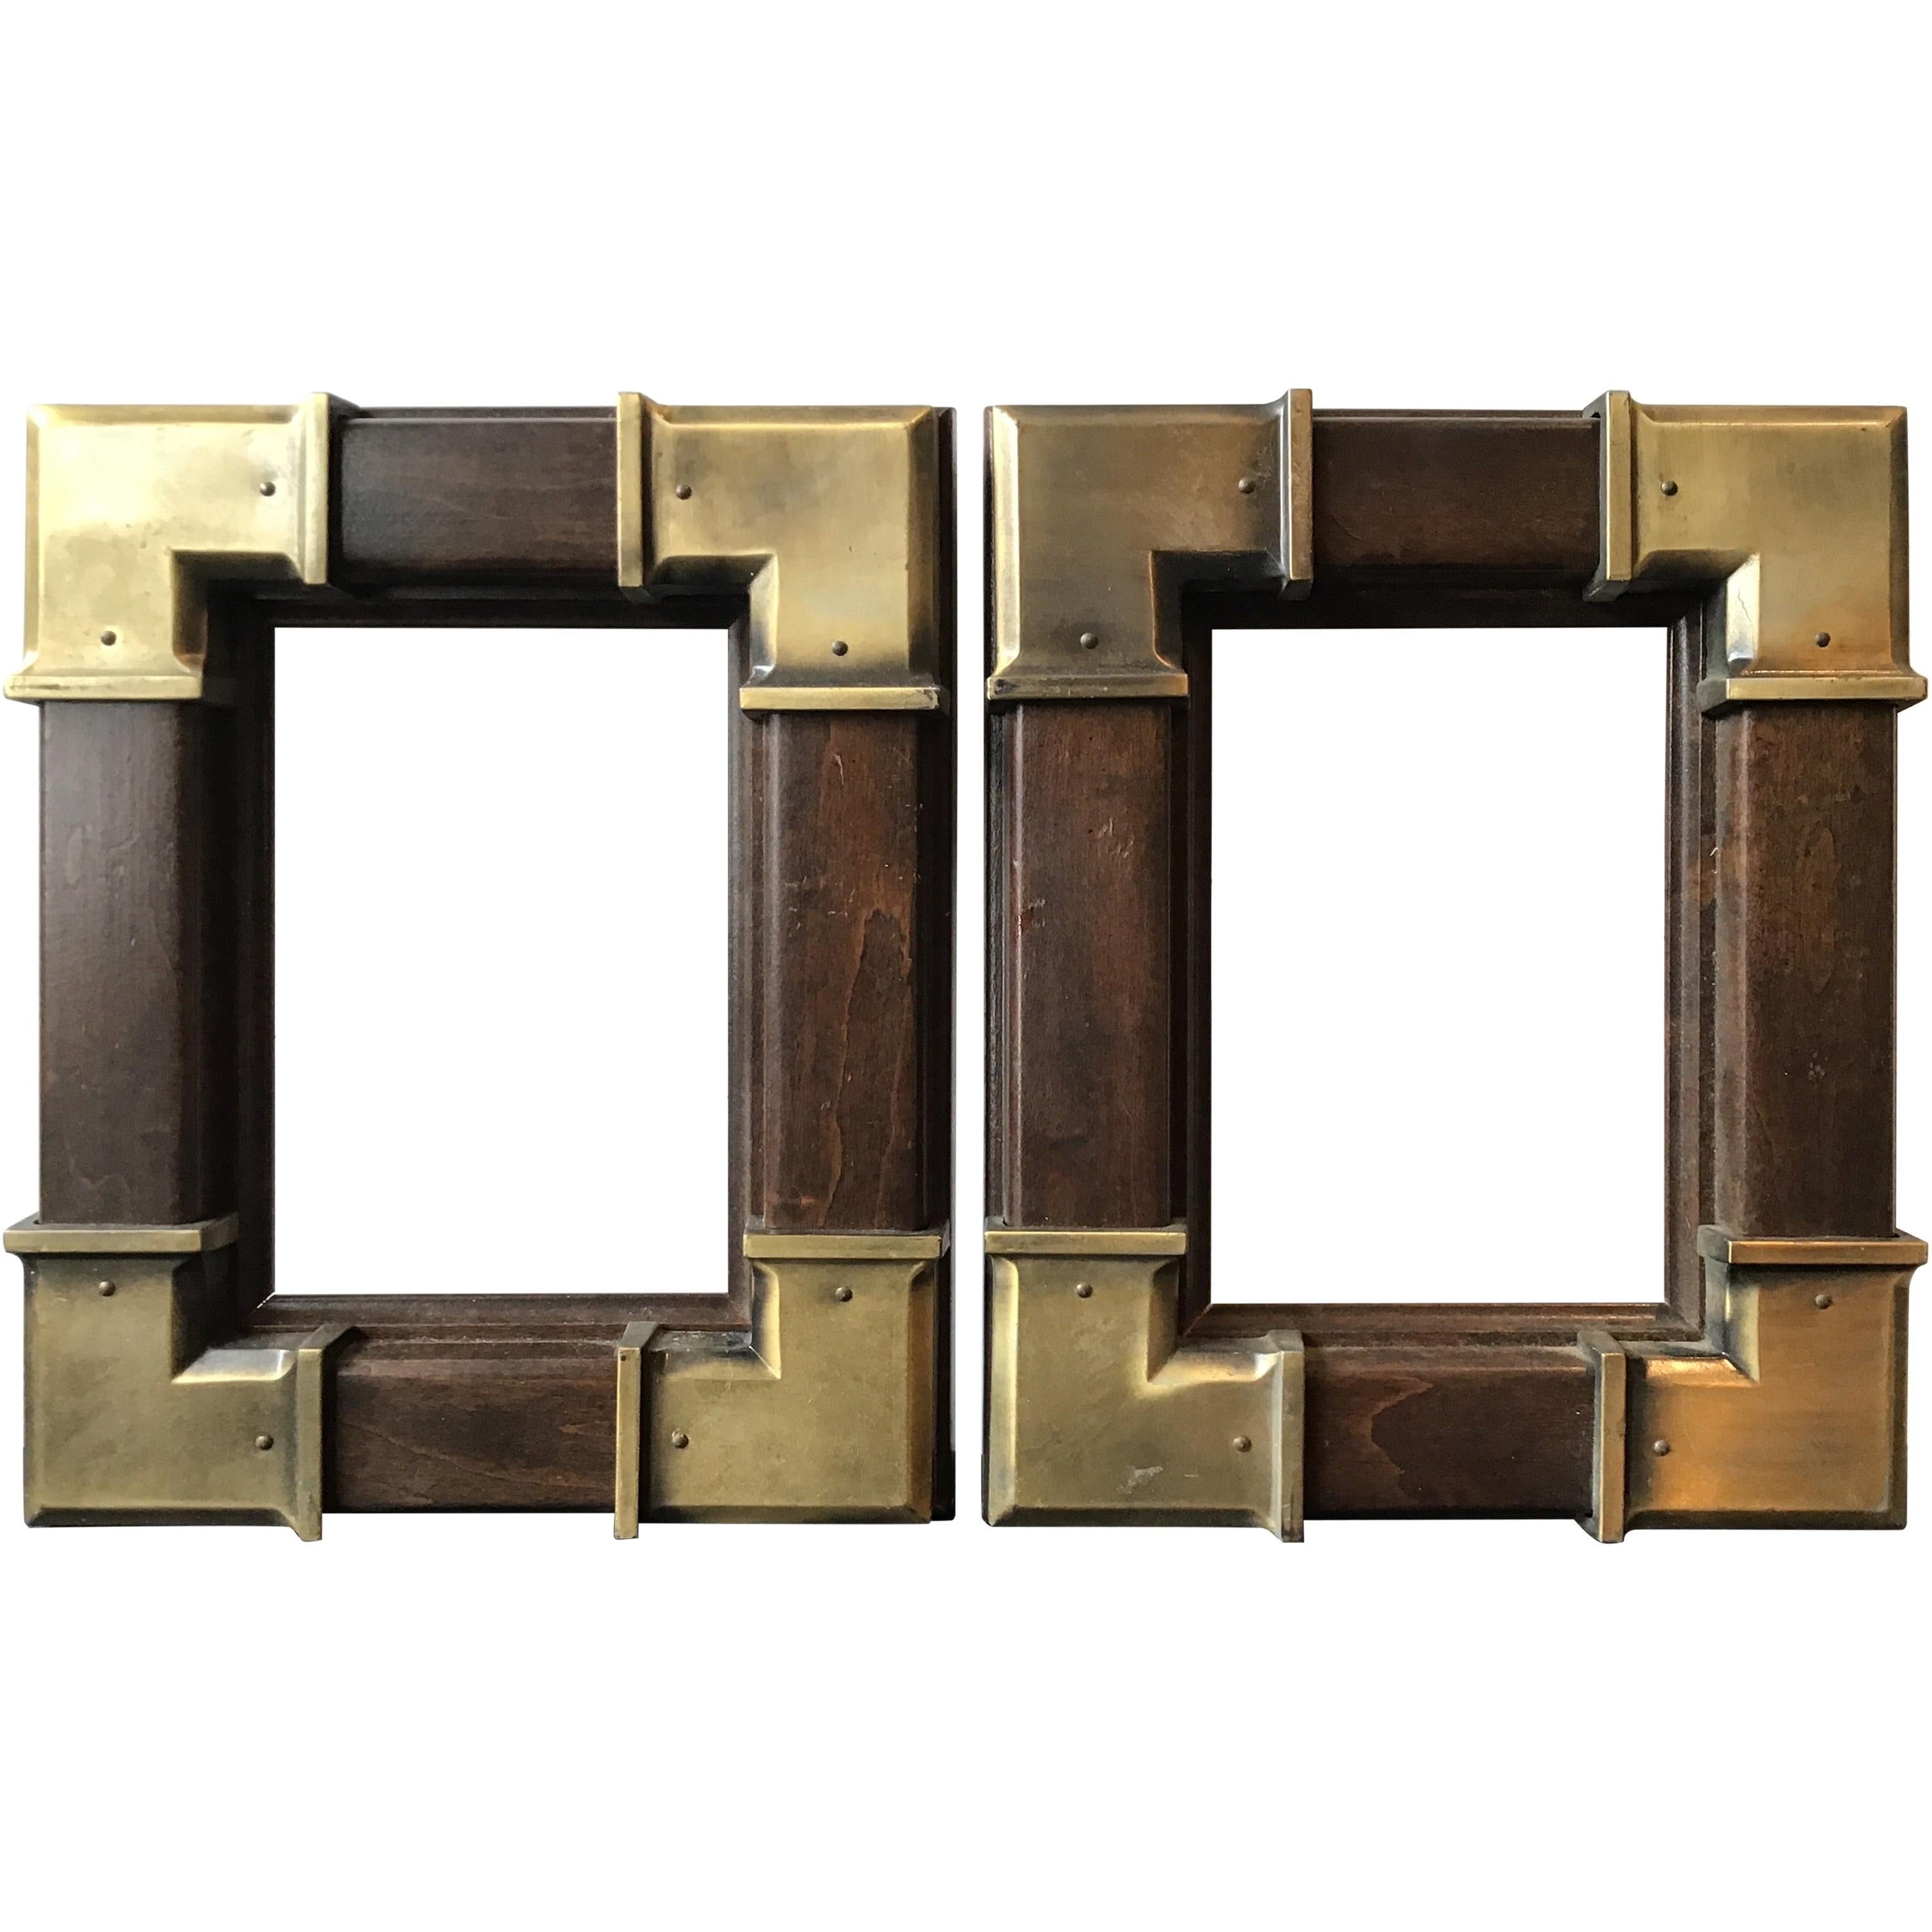 Pair of Small Wood Frames with Brass Accents